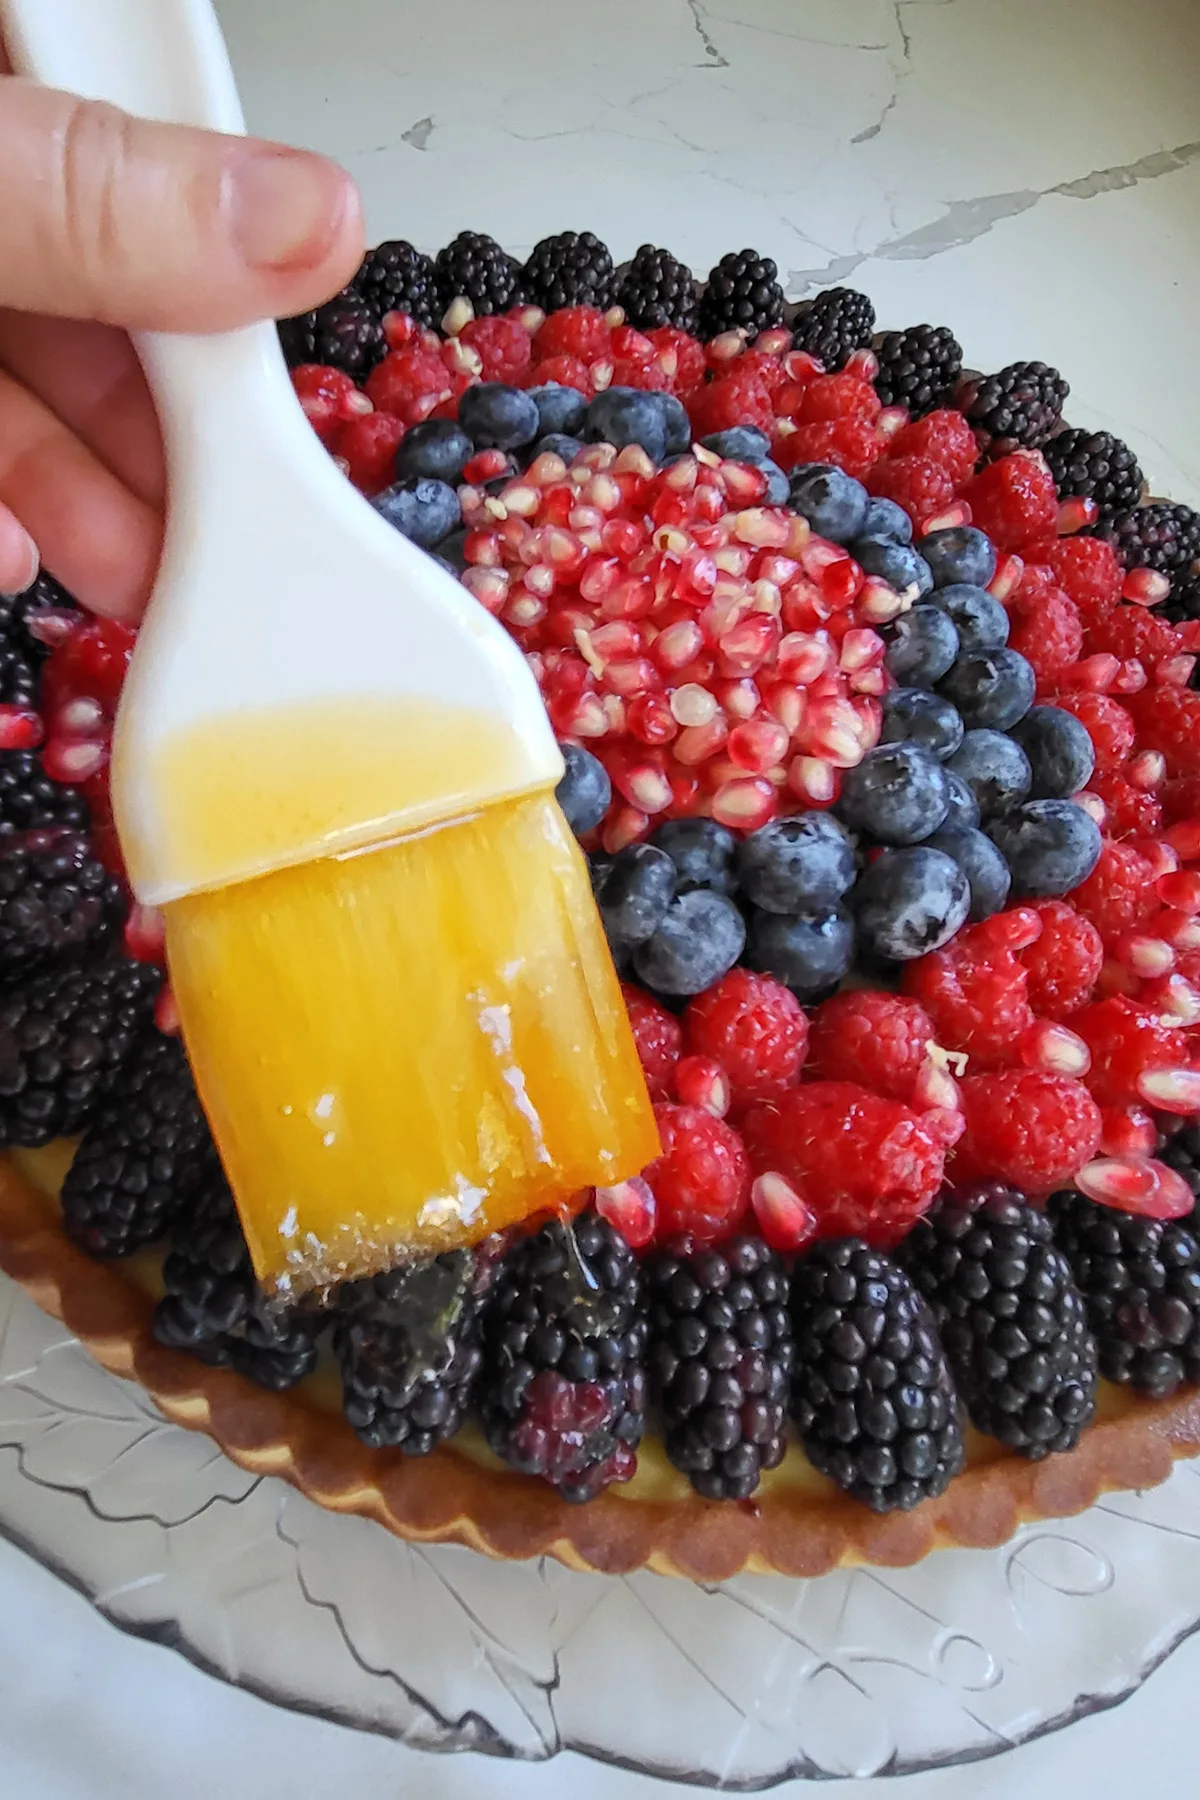 A fruit tart being brushed with melted apricot preserves.